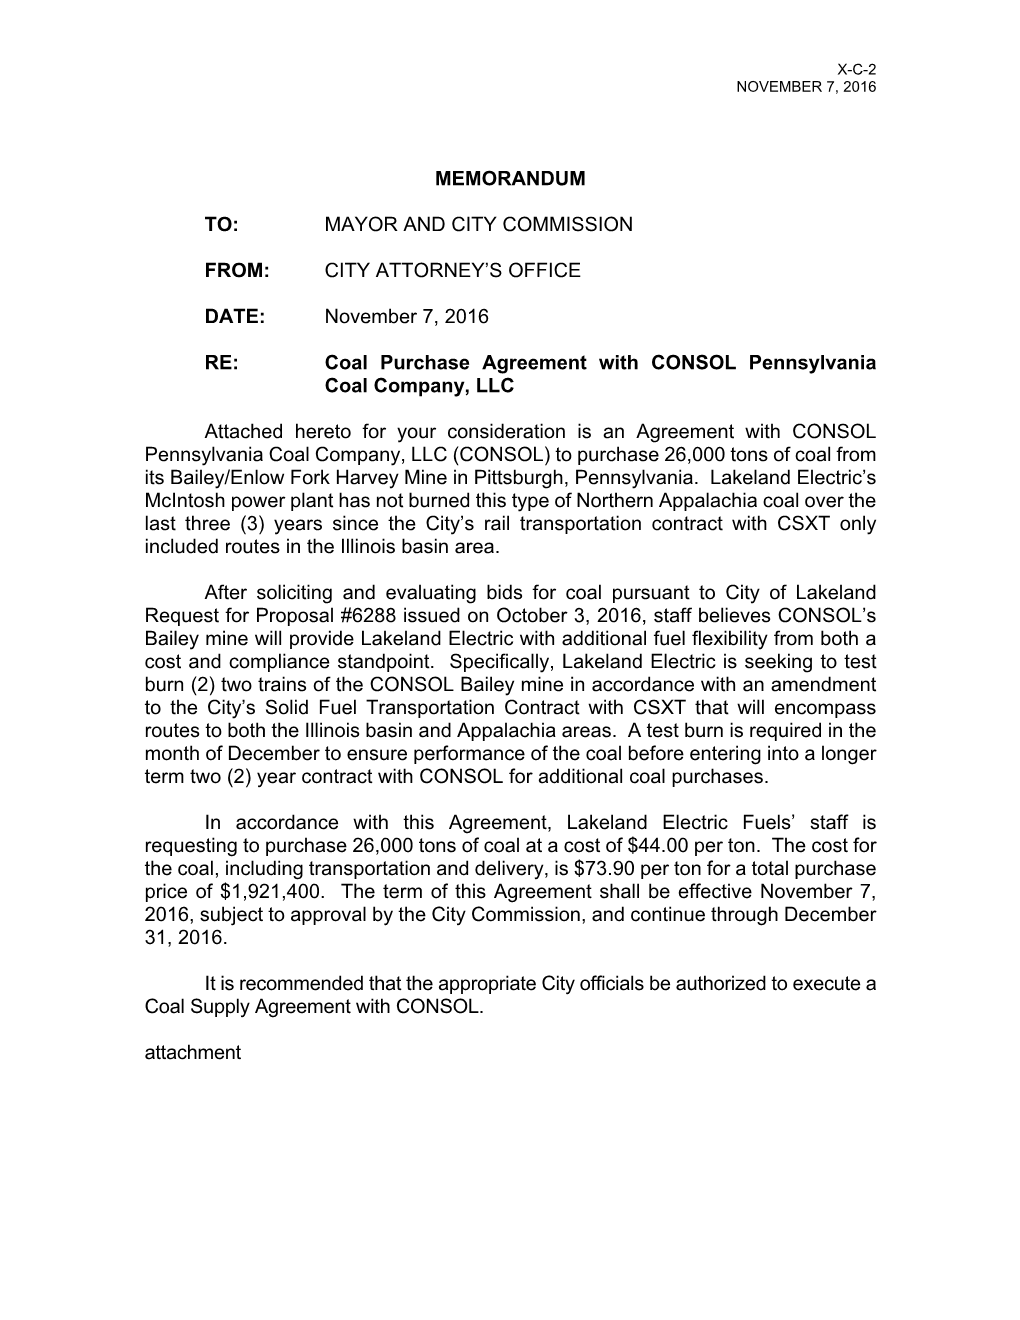 Coal Purchase Agreement with CONSOL Pennsylvania Coal Company, LLC